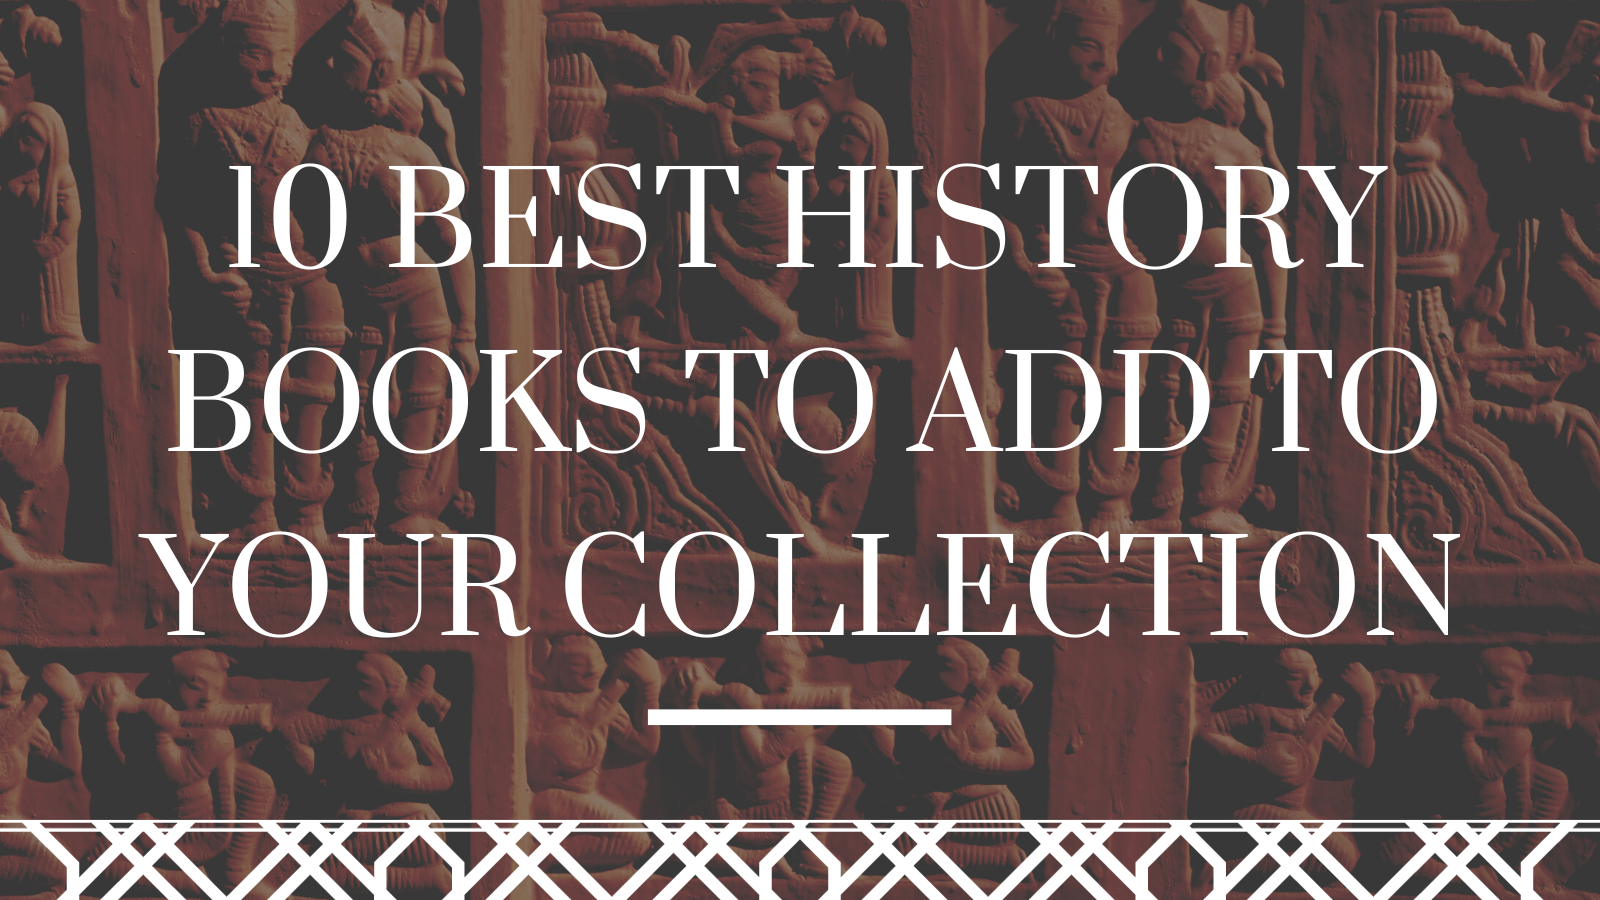 Curating History: 10 Best History Books to Add to Your Collection